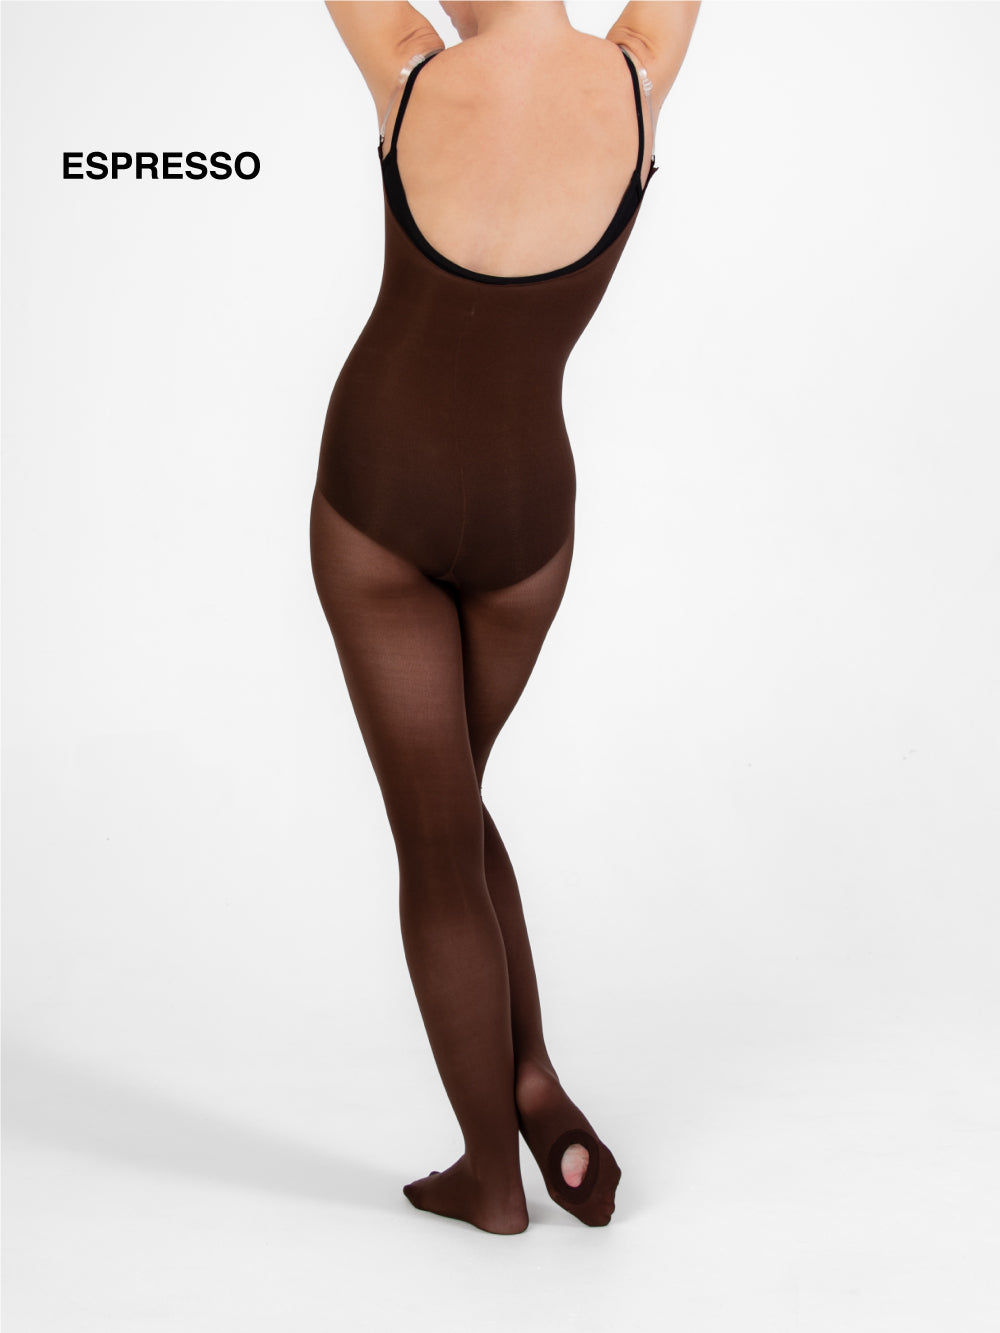 Large / X-Large, Suntan) - Body Wrappers Footless Tights : :  Clothing, Shoes & Accessories